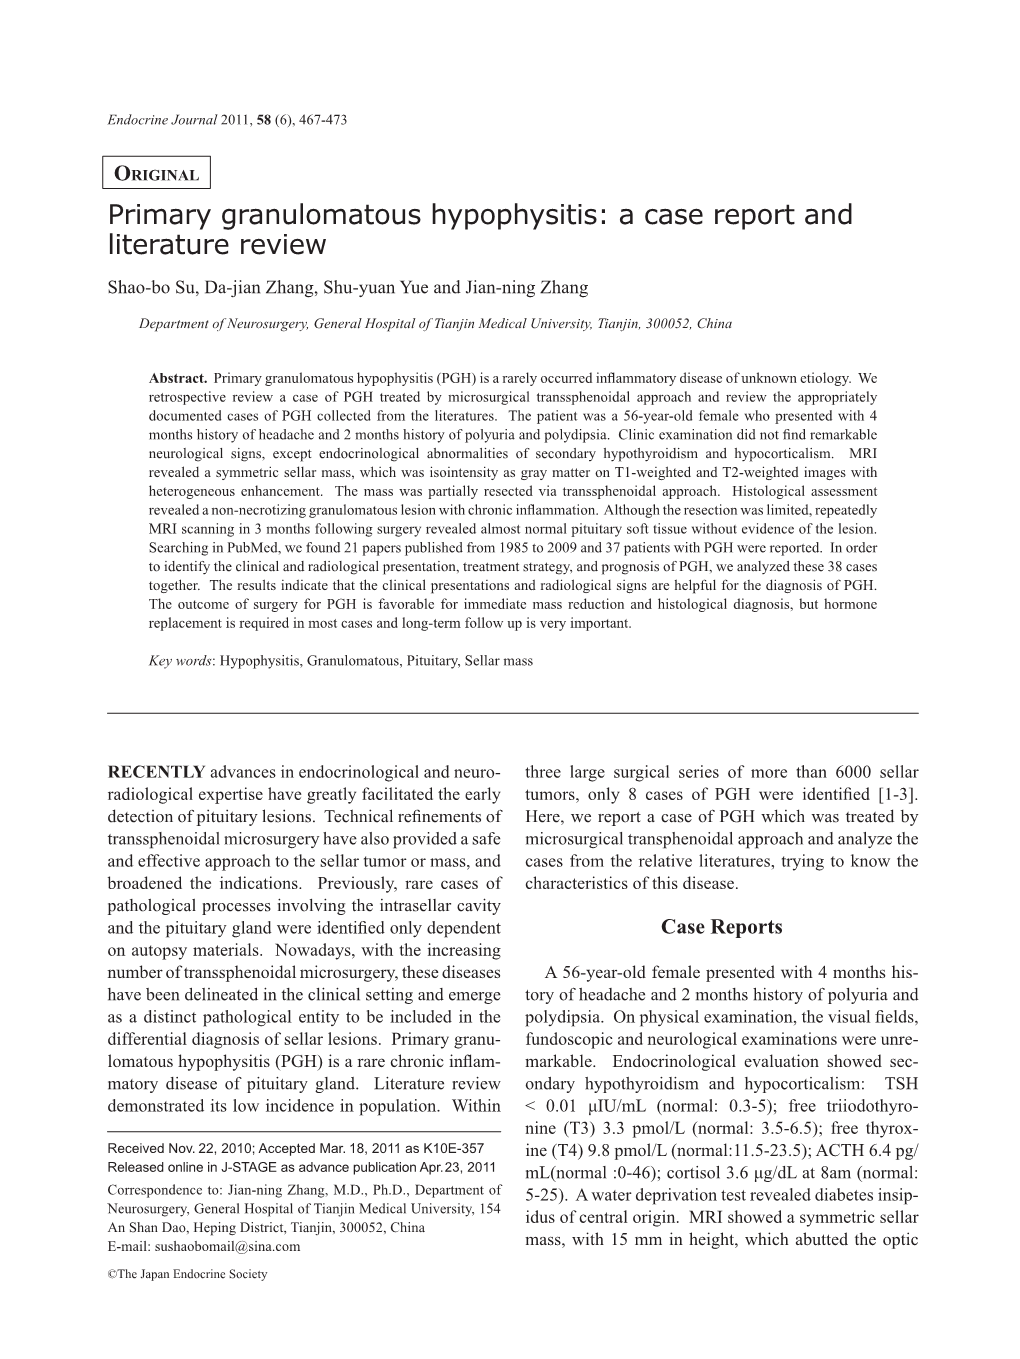 Primary Granulomatous Hypophysitis: a Case Report and Literature Review